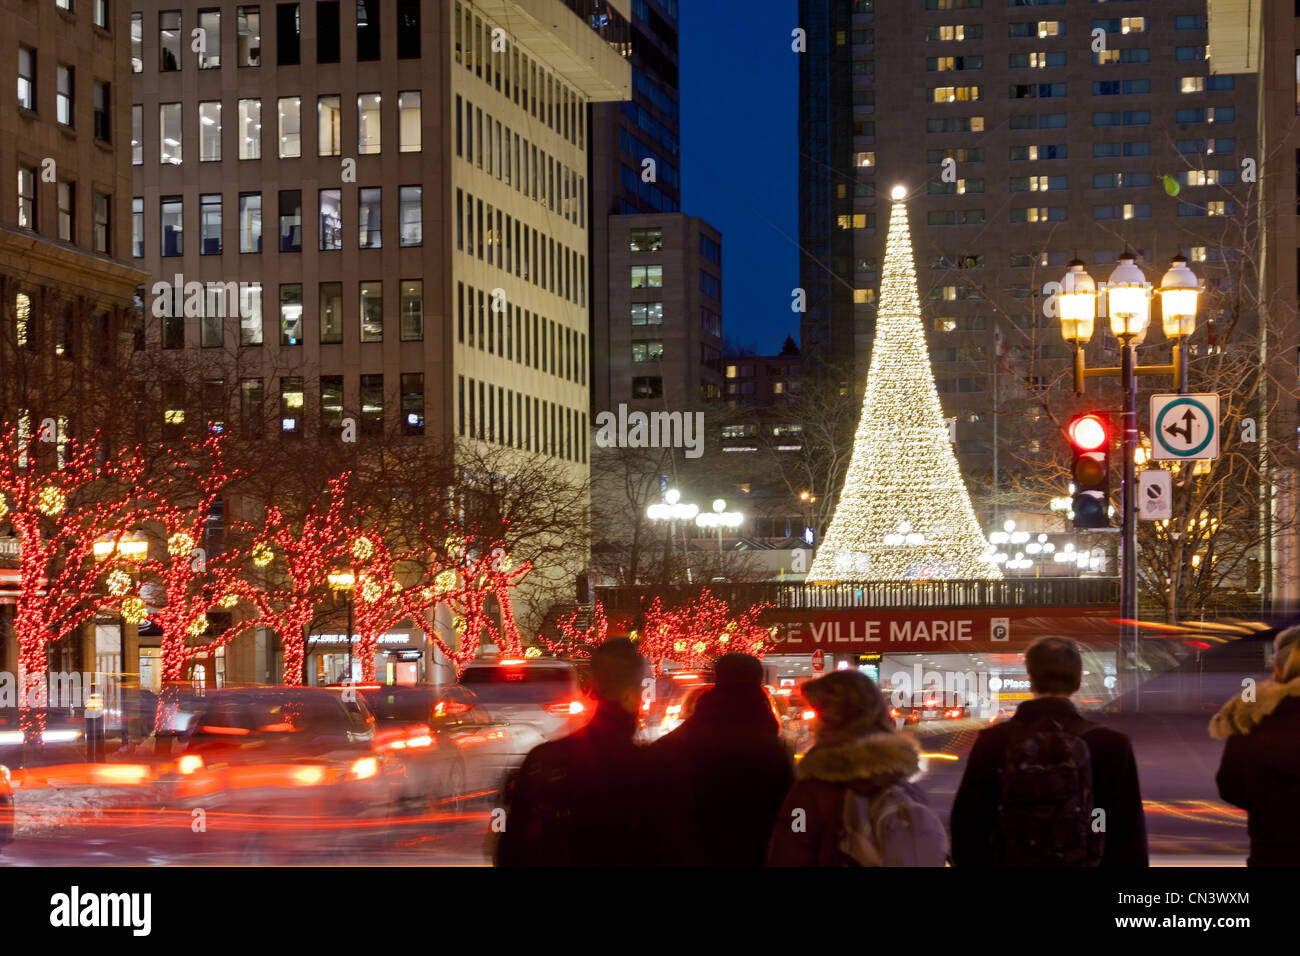 Canada, Quebec province, Montreal, decorations and Christmas lights